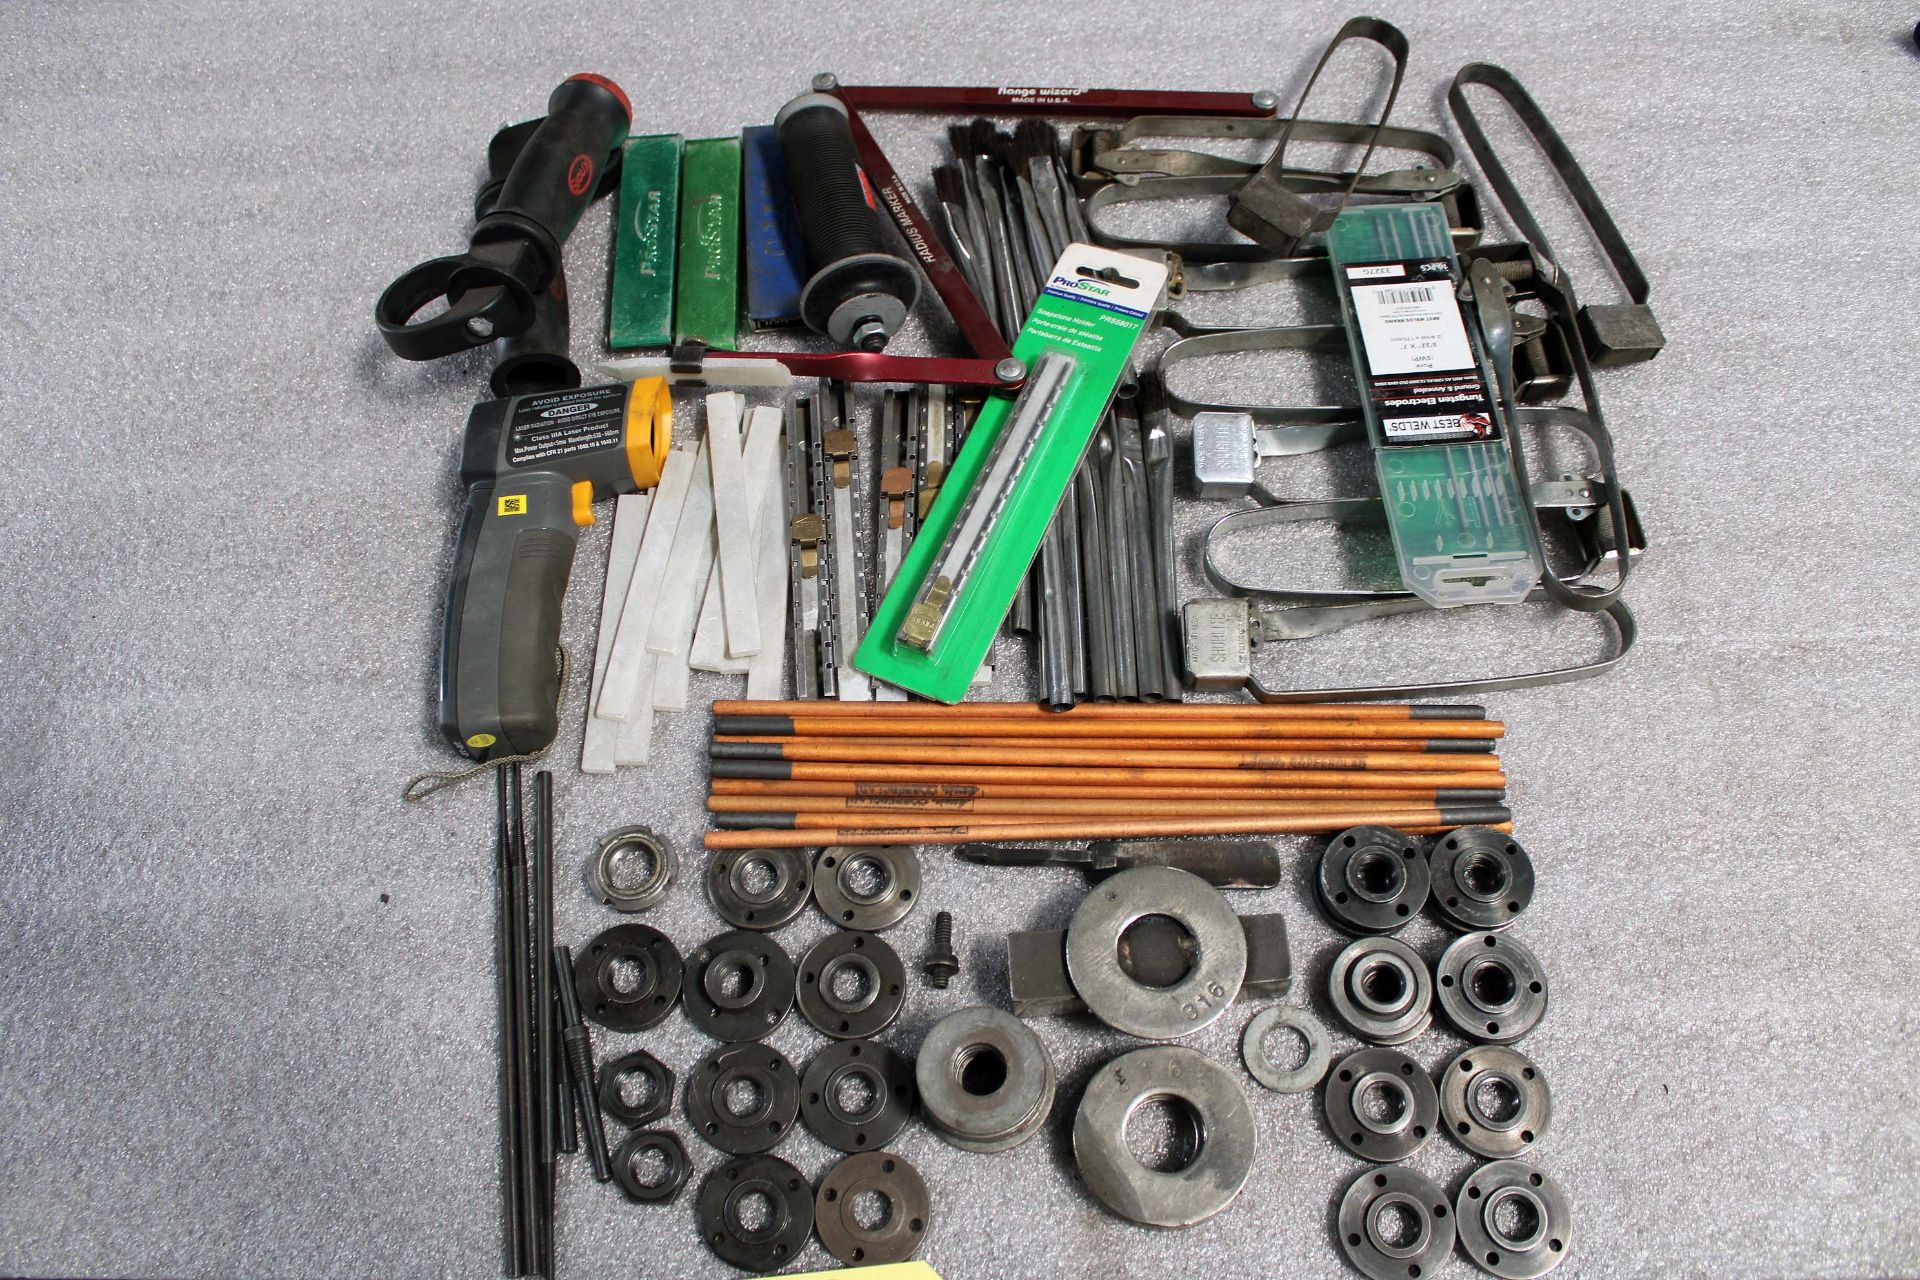 LOT CONSISTING OF: strikers, brushes , wire guides, tip cleaners & other items